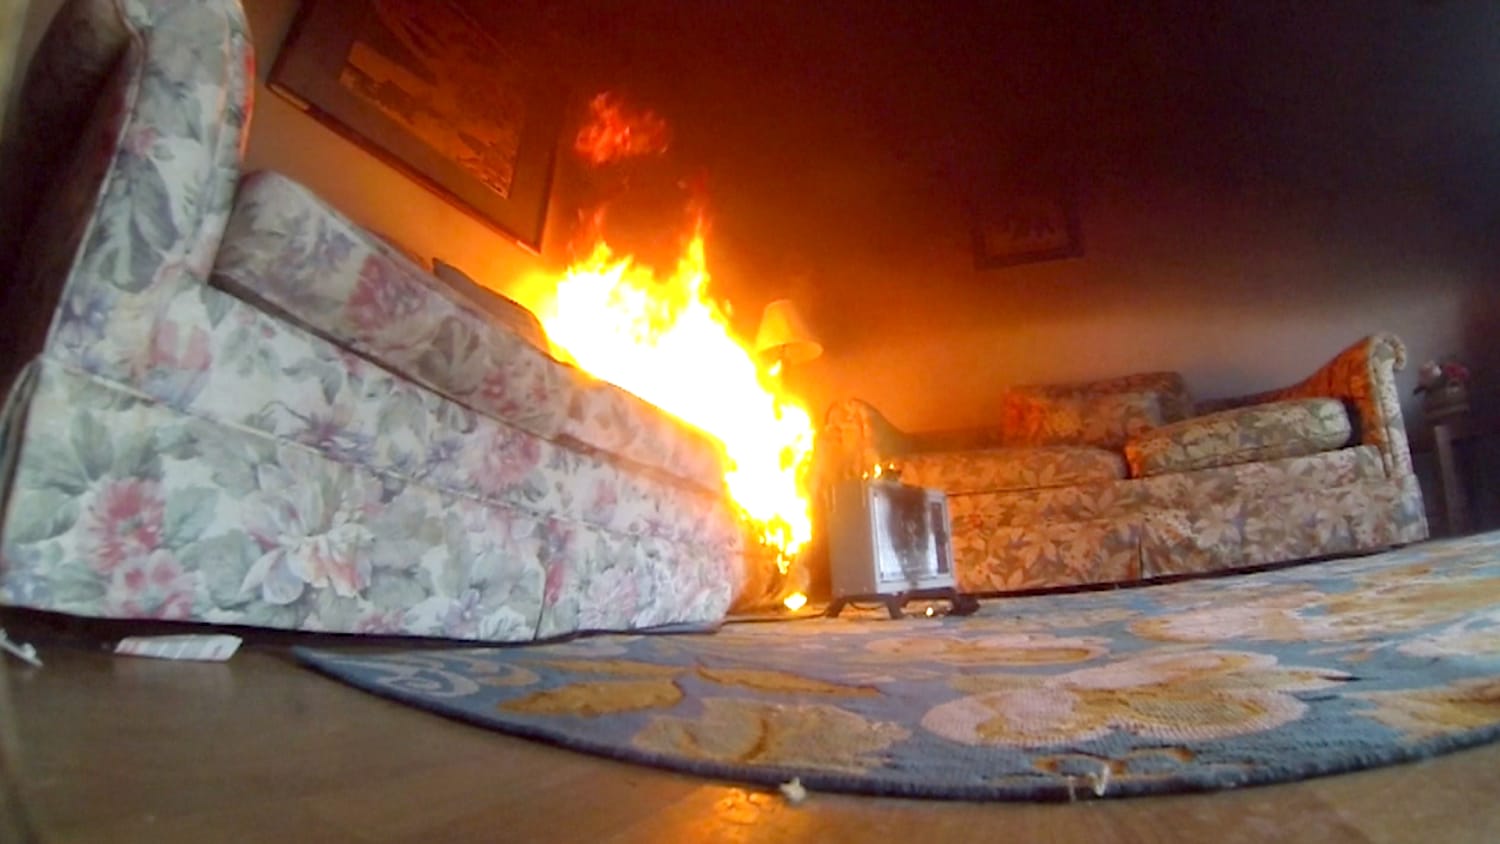 Why did my space heater catch on fire?